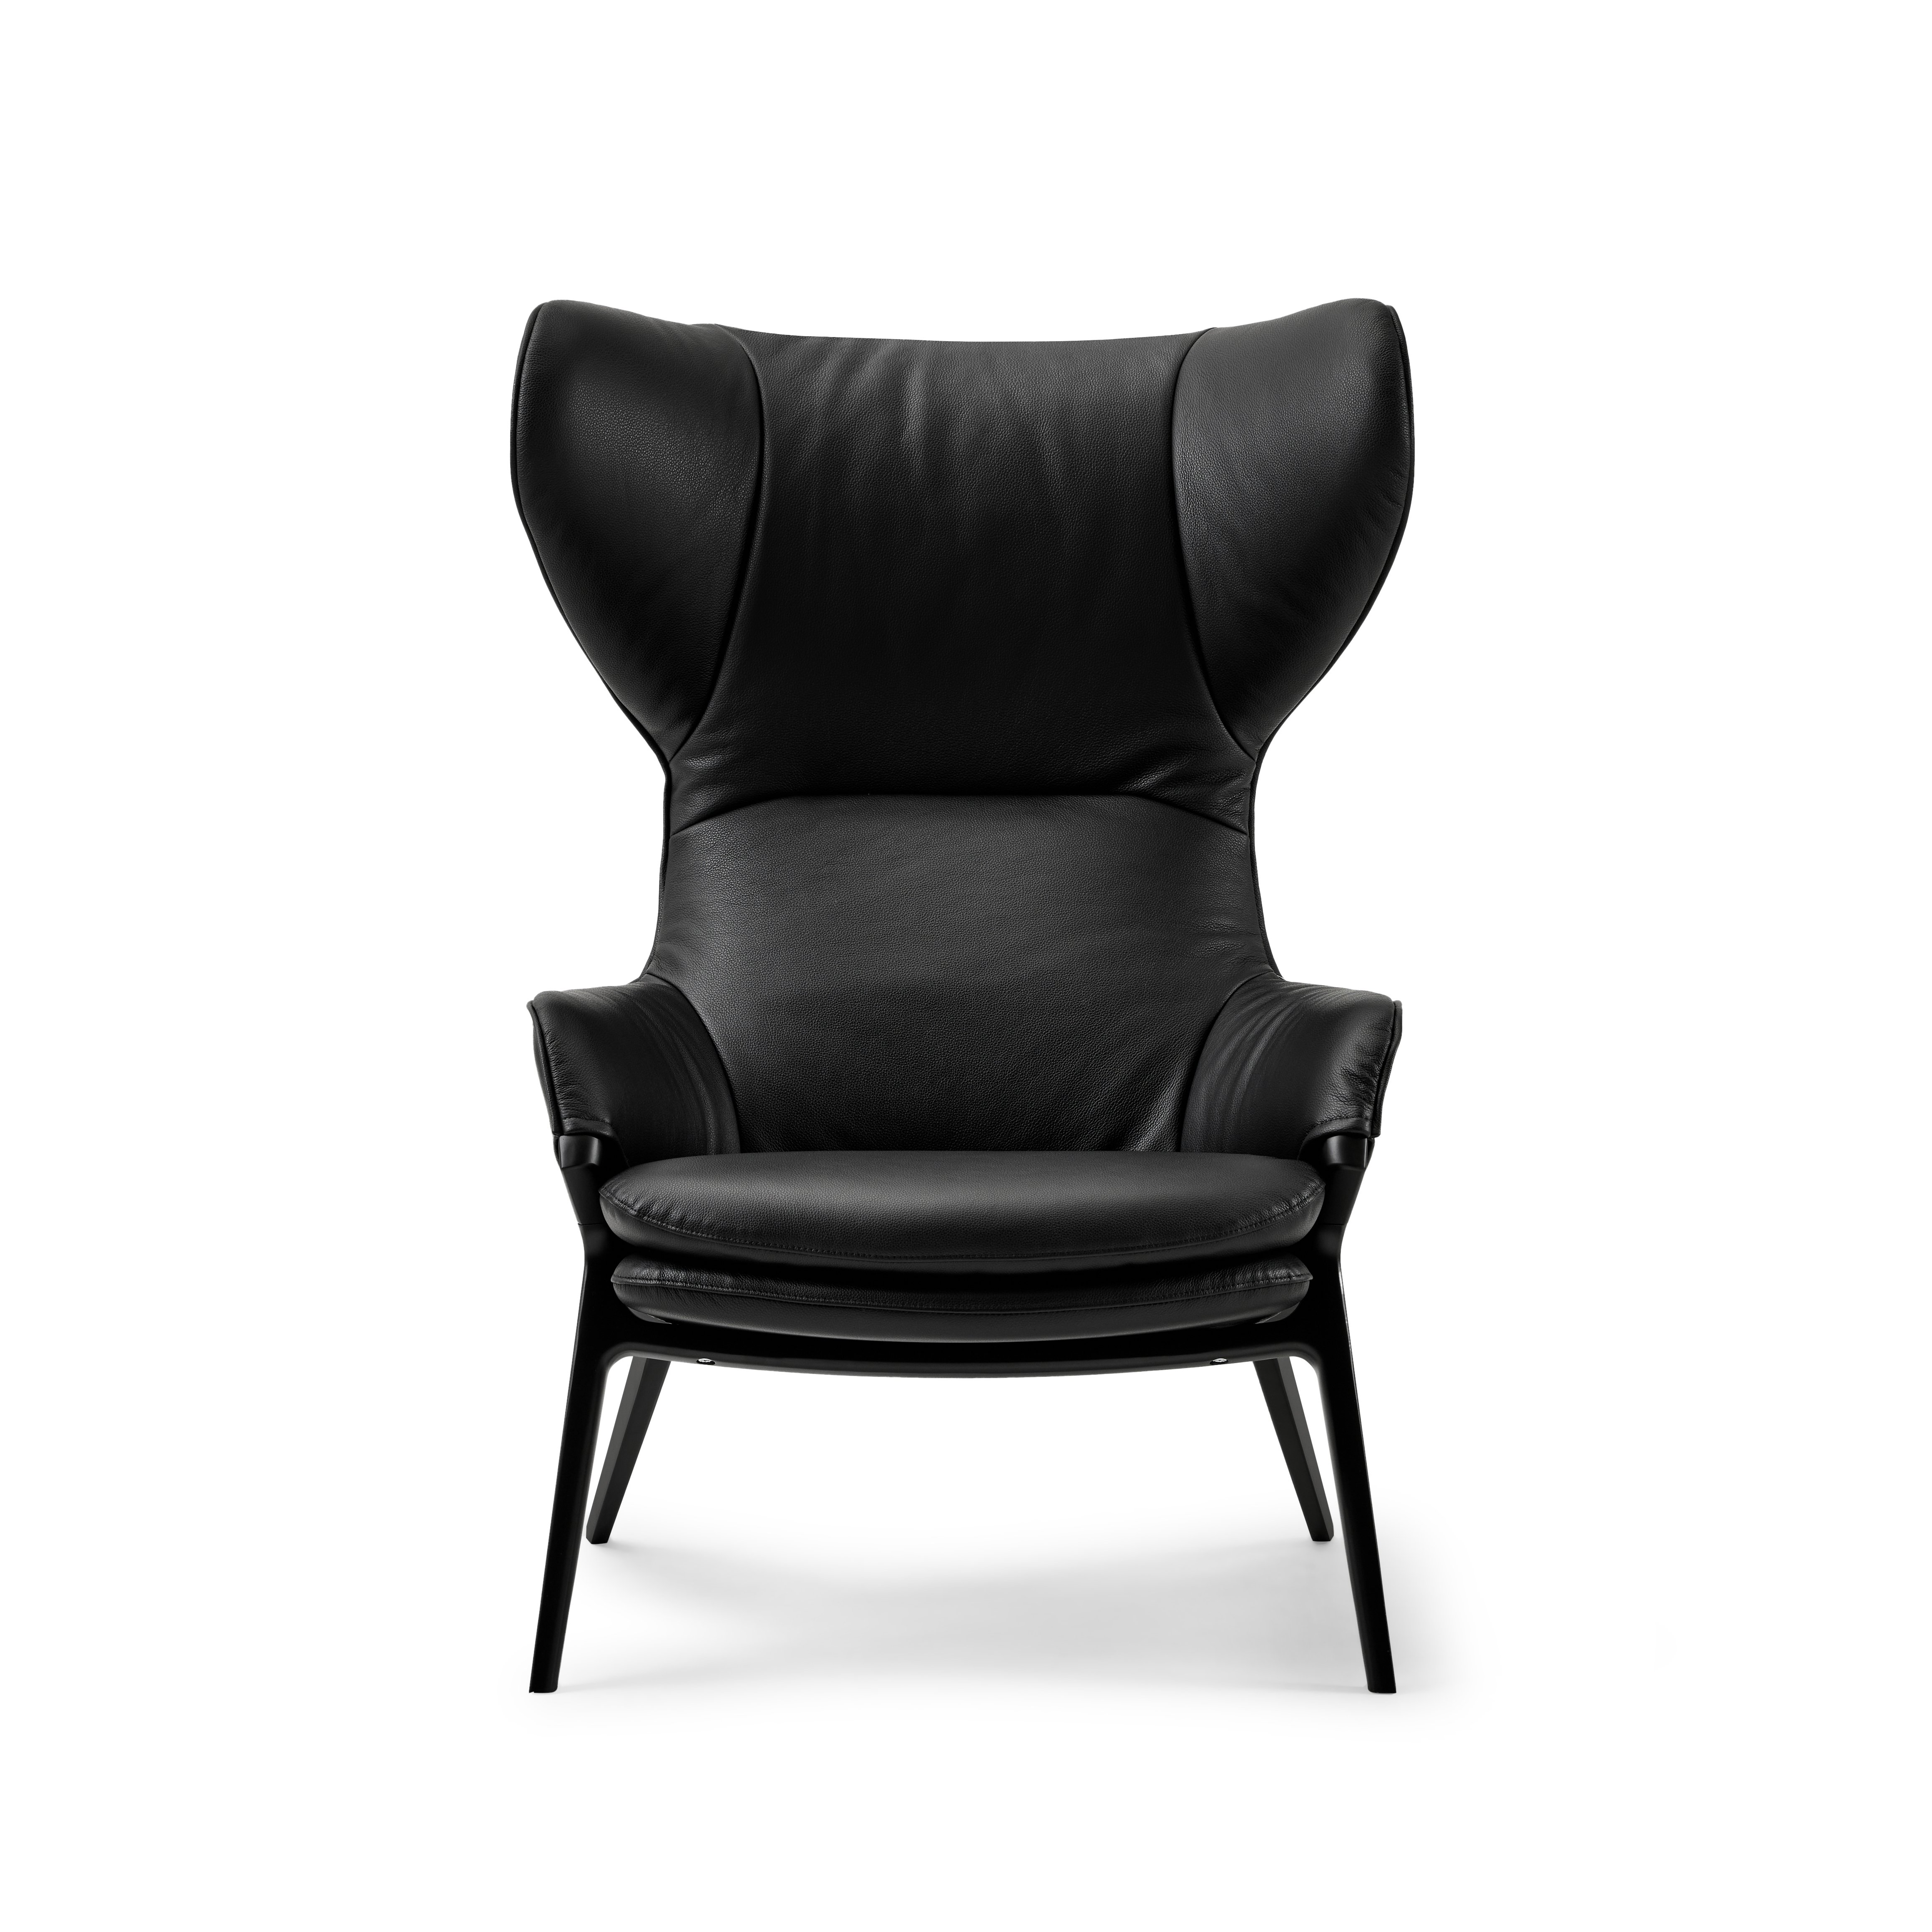 Detail front shot of the P22 lounge chair in Grafite